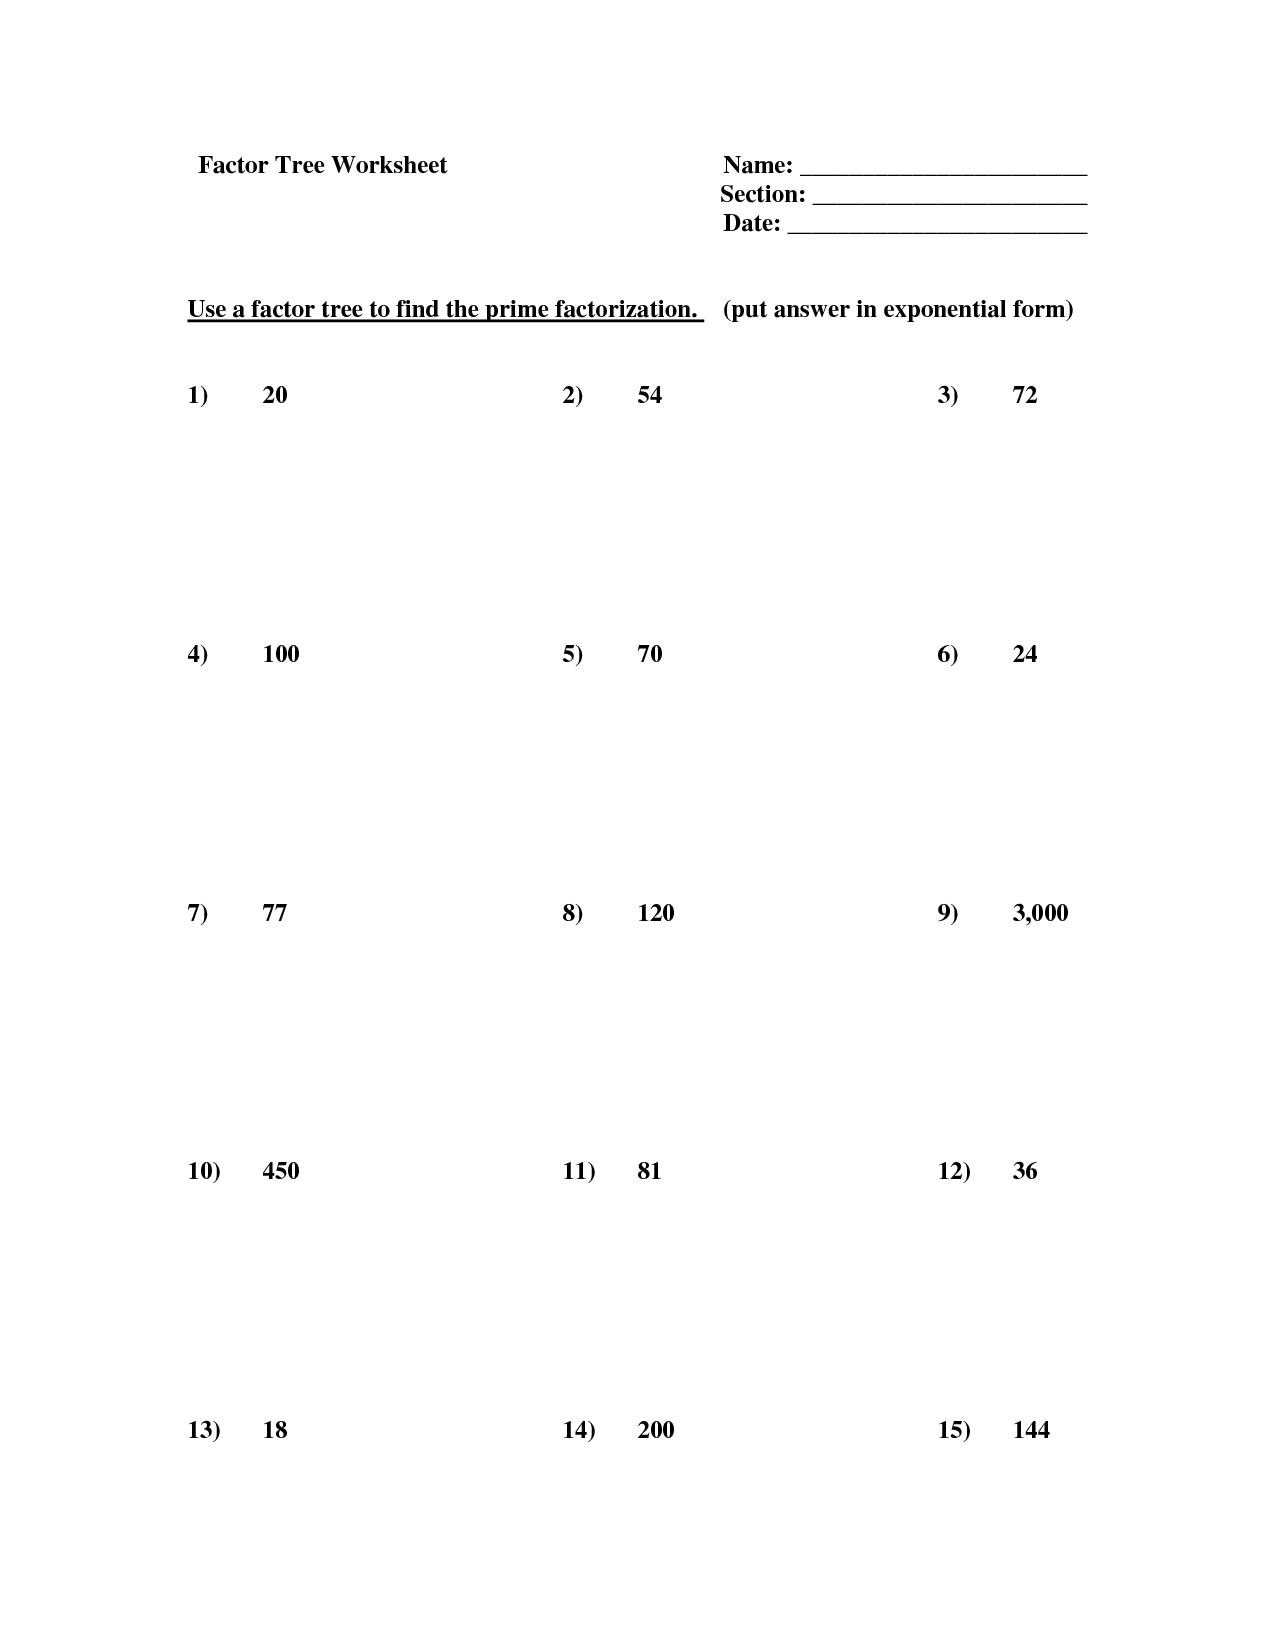 7-best-images-of-greatest-common-factor-factor-tree-worksheets-7th